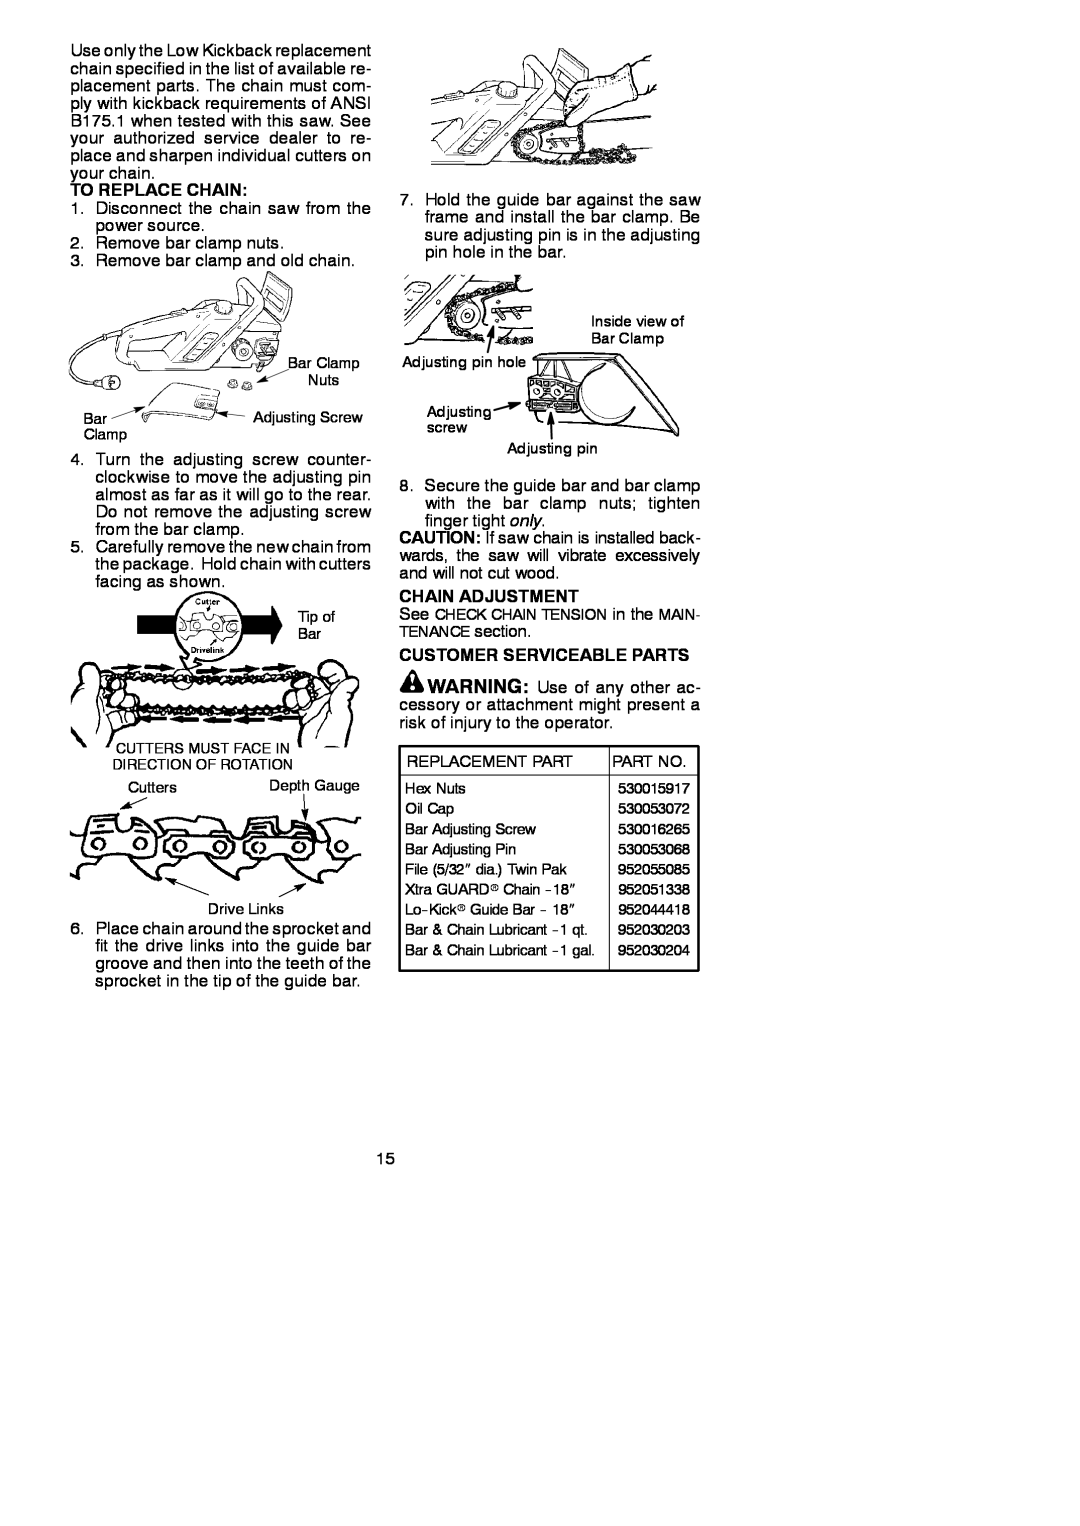 Poulan 952801955 instruction manual To Replace Chain, Chain Adjustment, Customer Serviceable Parts 